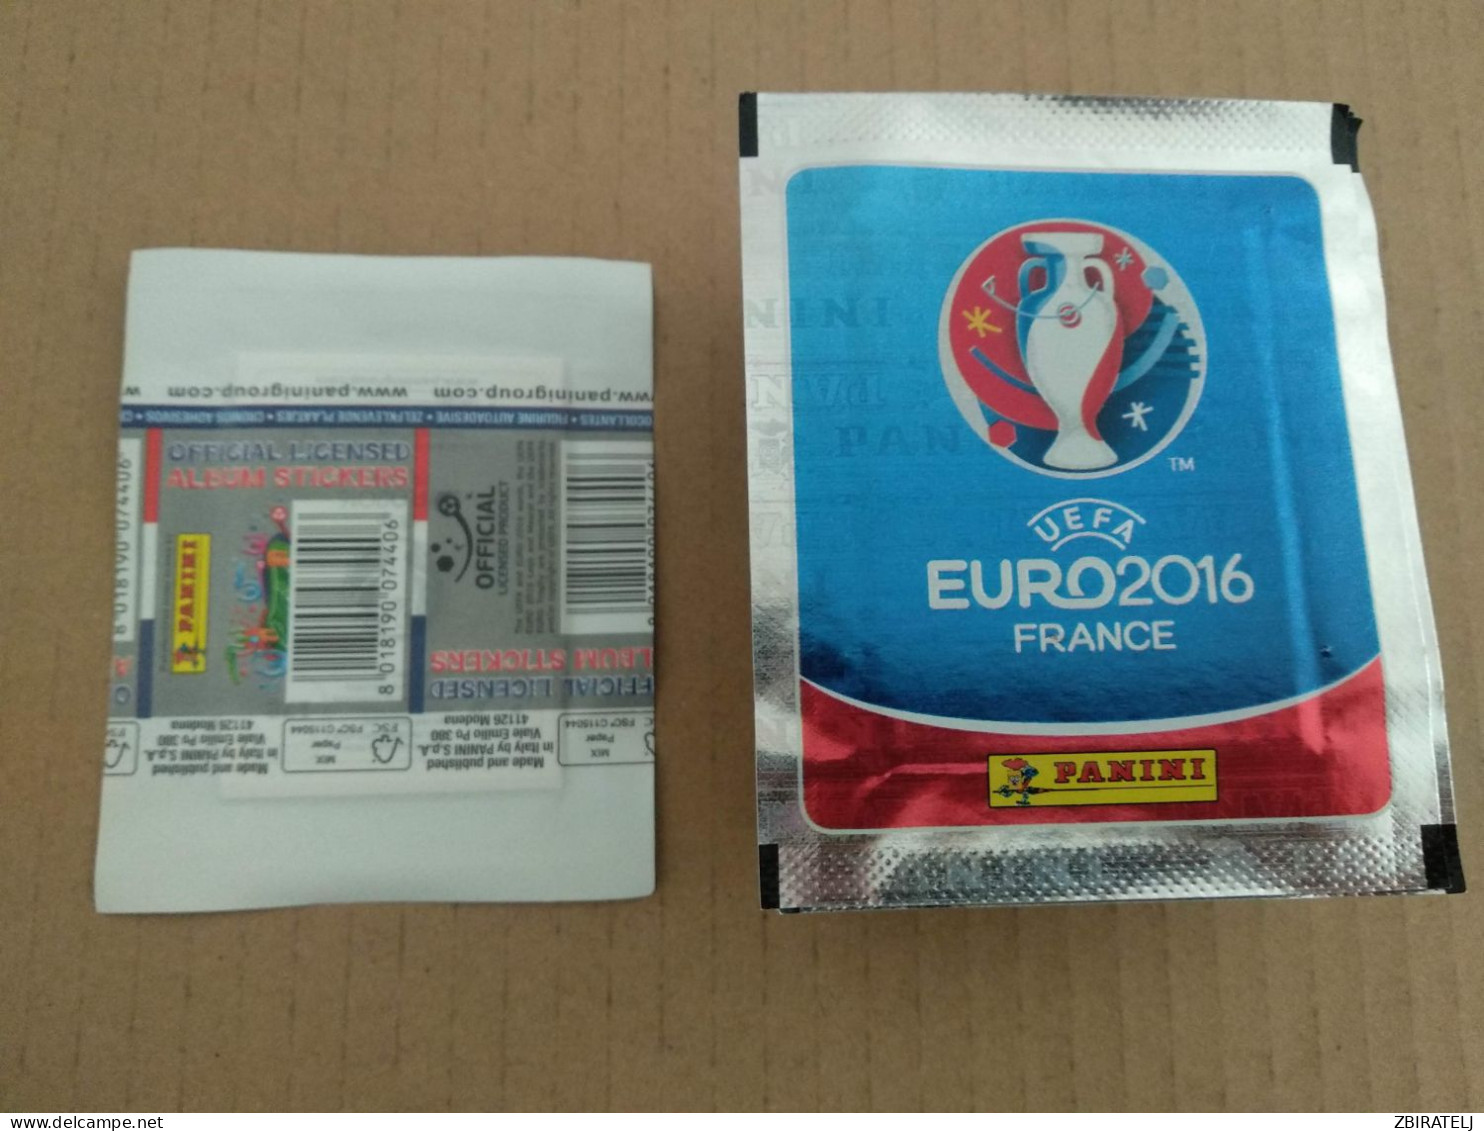 50 X PANINI UEFA EURO 2016 FRANCE - PACKS (250 Stickers) Tüte Bustina Pochette Packet Pack - English Edition